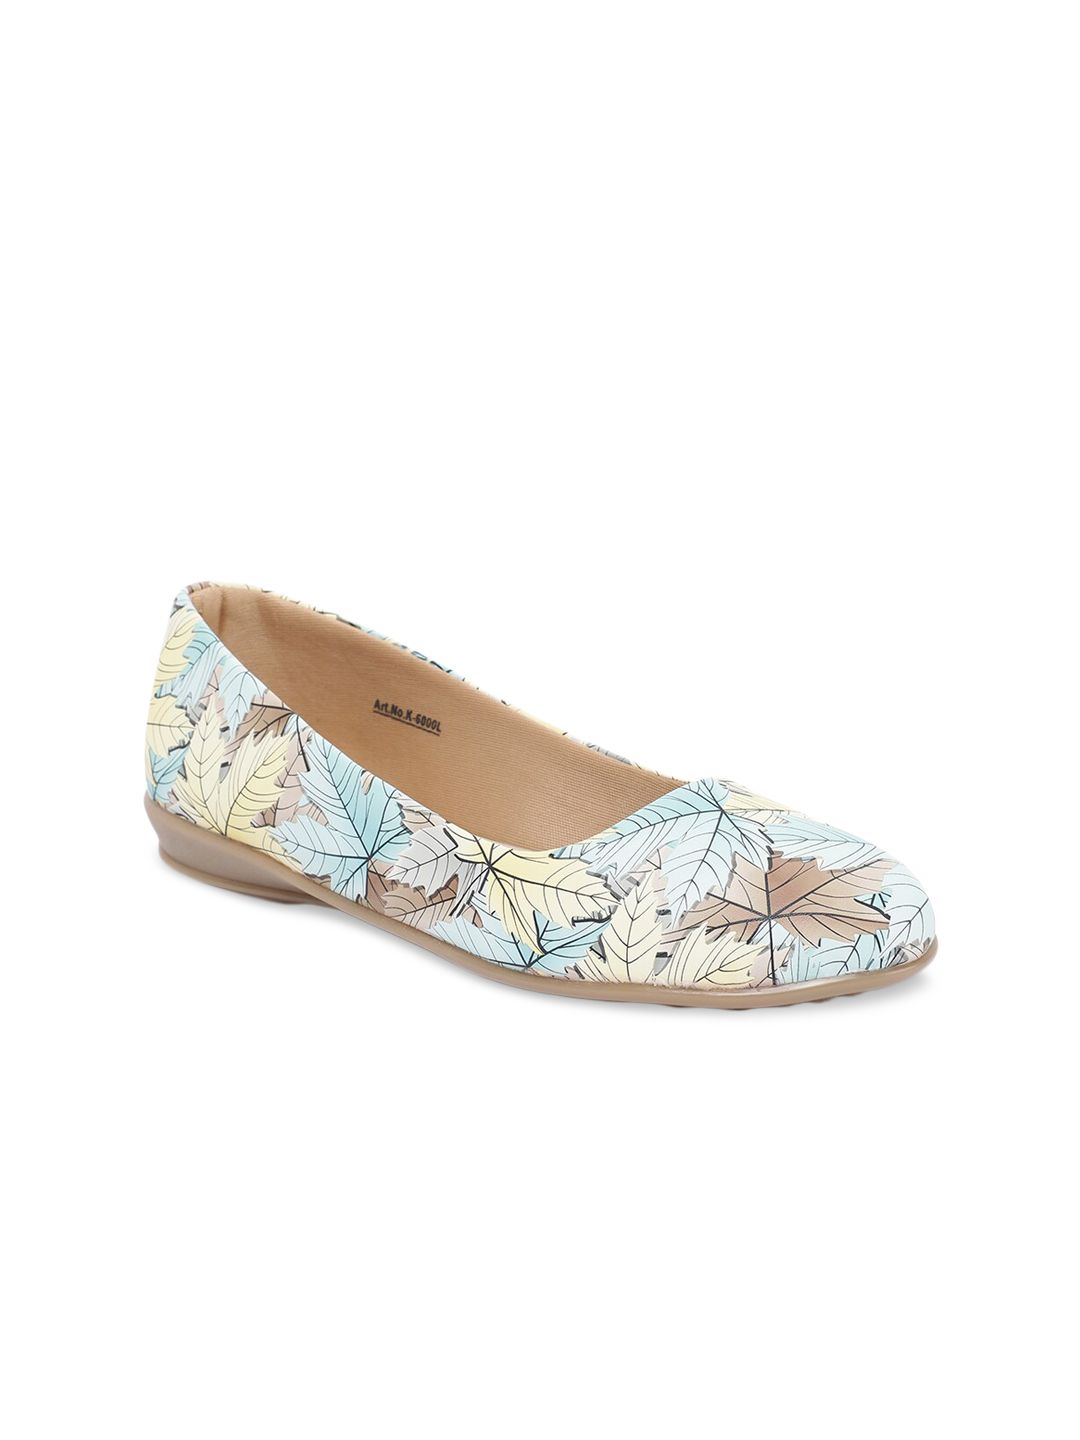 Paragon Women Blue & Yellow Printed Leather Slip-On Sneakers Price in India